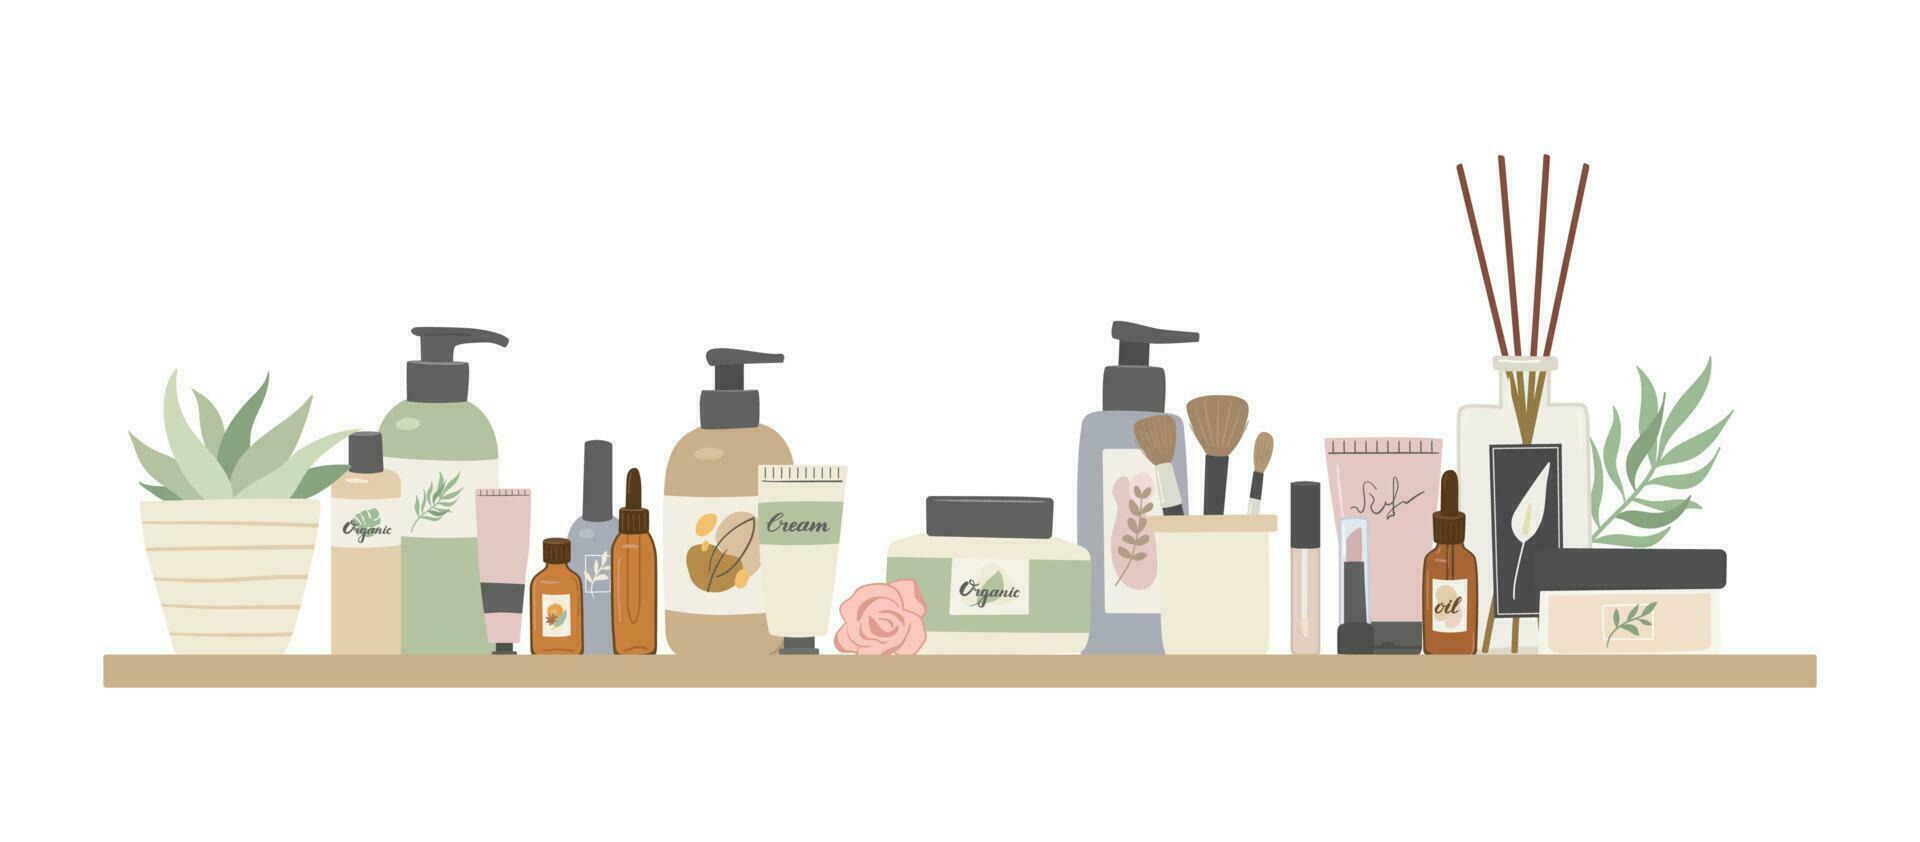 Beauty natural cosmetic standing on shelf. Bottles, tube, jars, hair shampoo, cream, spa accessories, essential oil, scrub, serum, gel, lipstick, makeup items isolated on white background vector